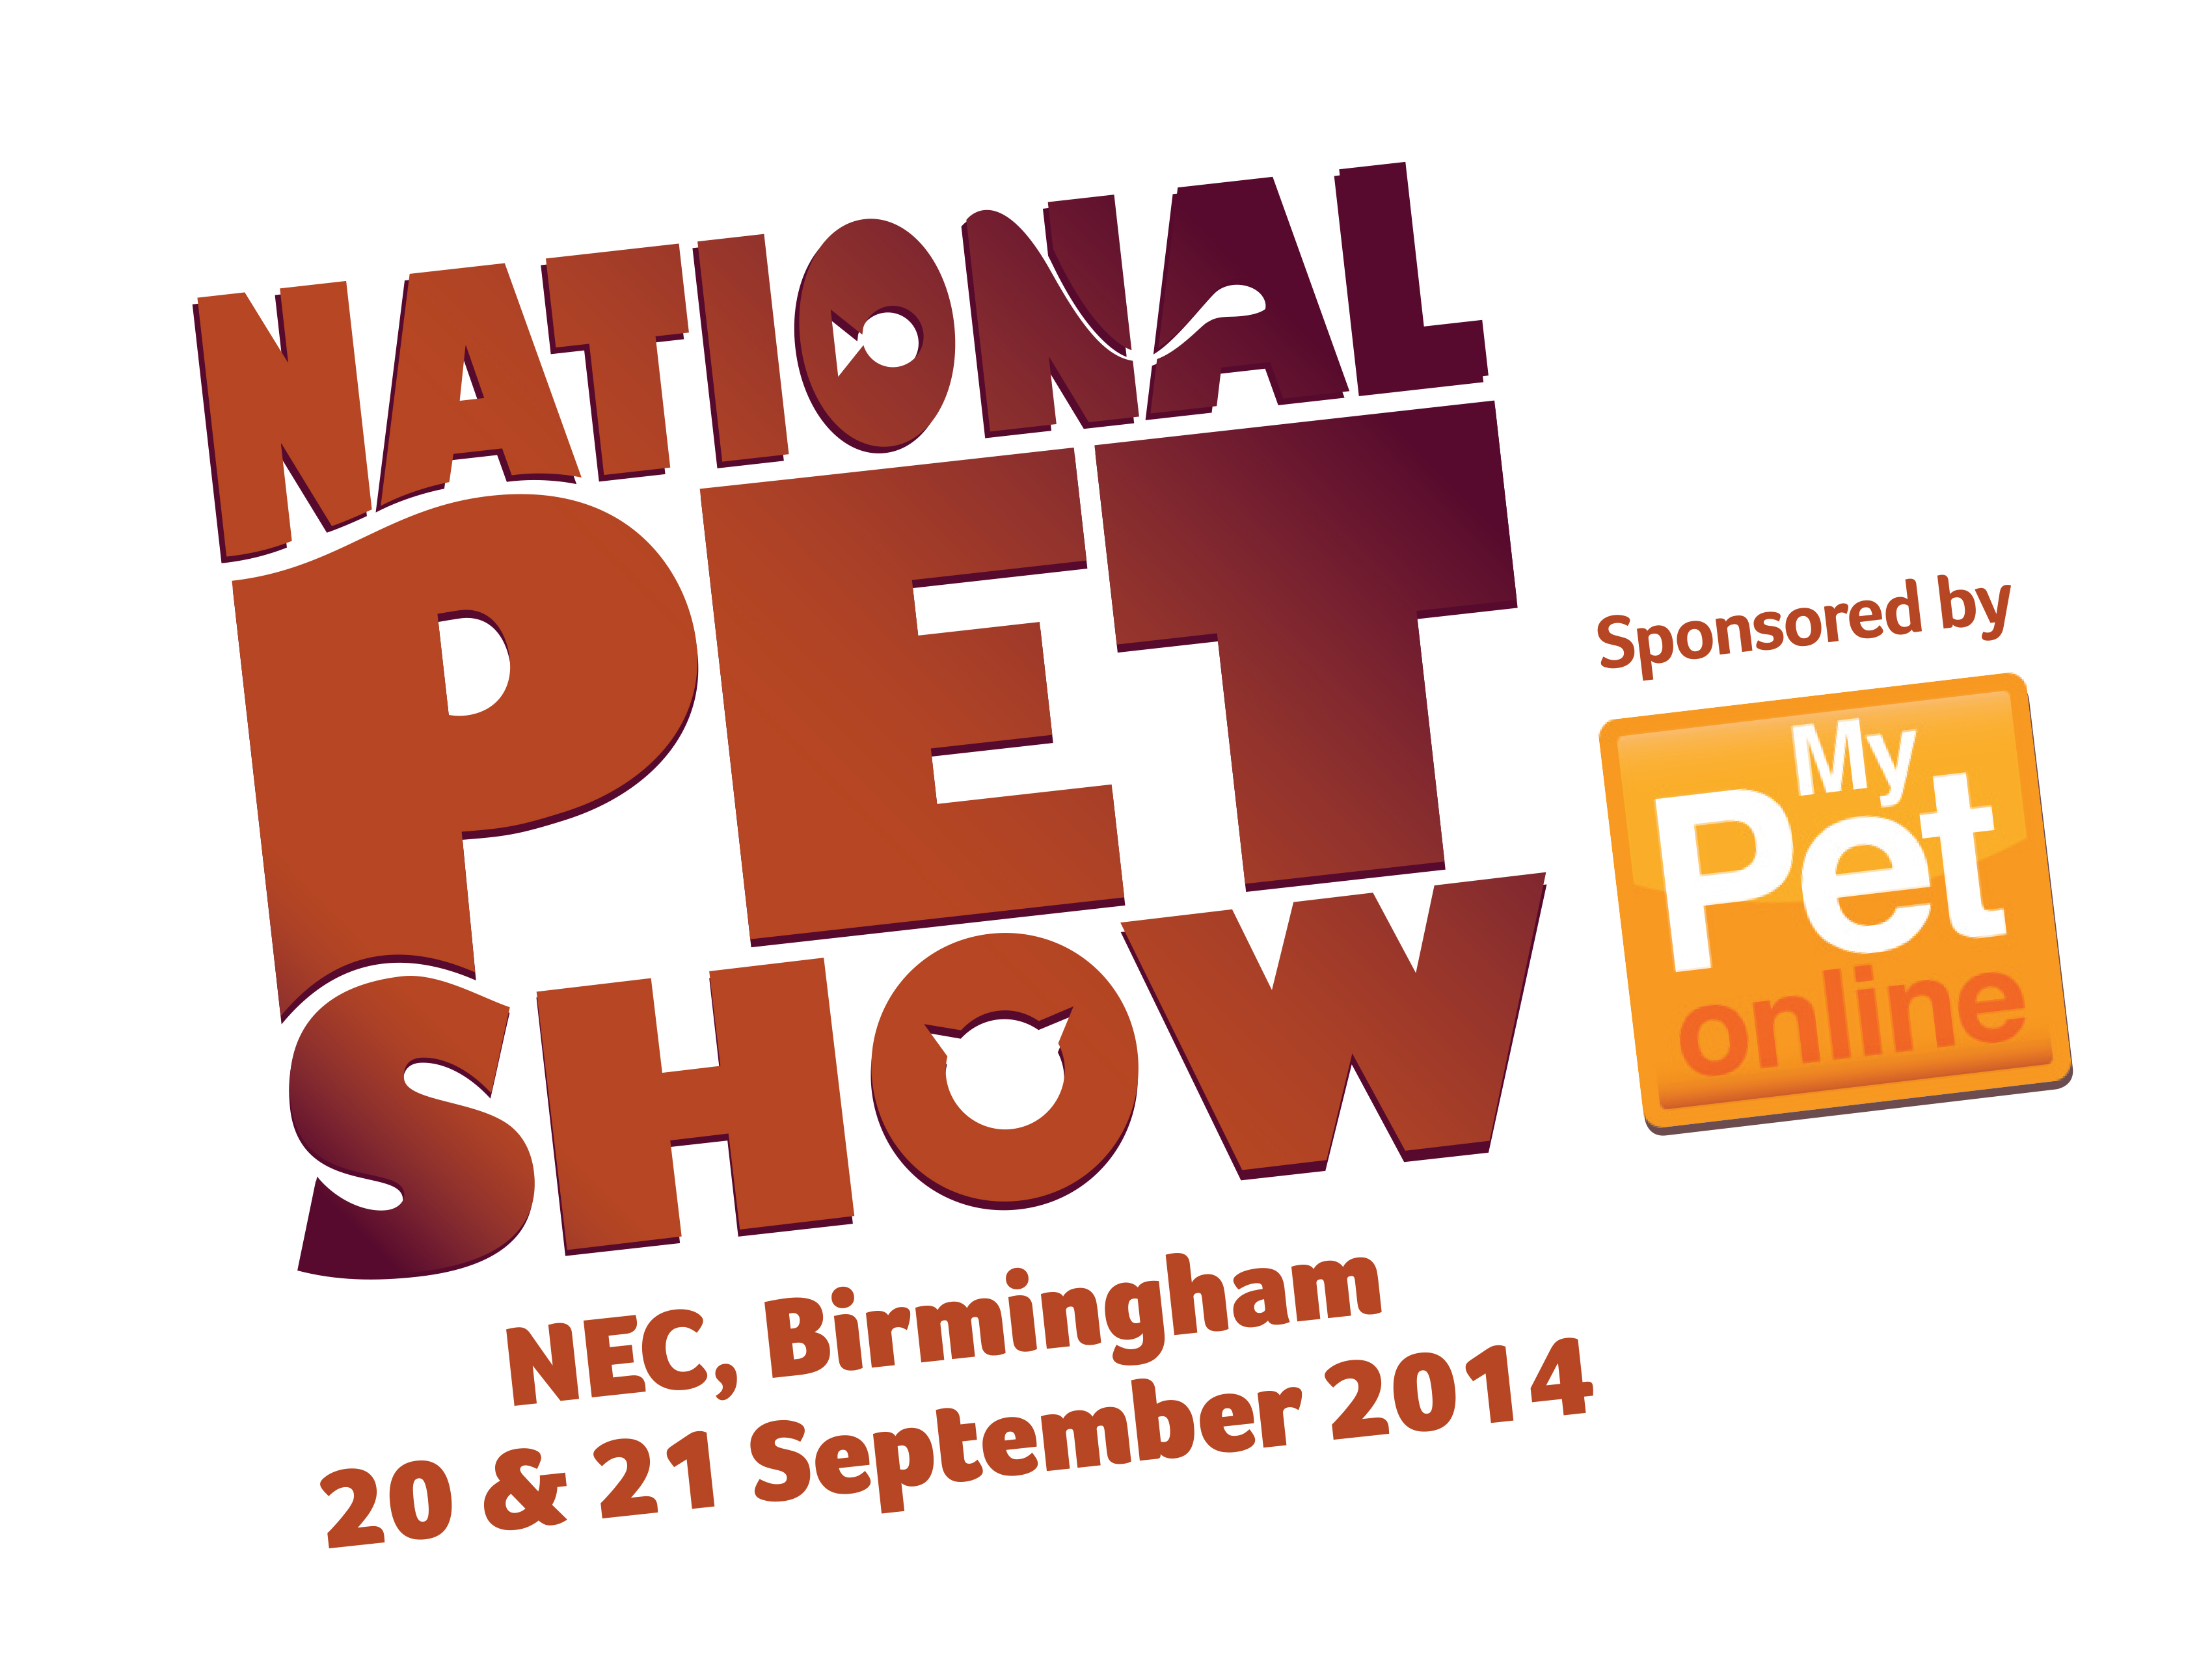 The National Pet Show Heart West Midlands